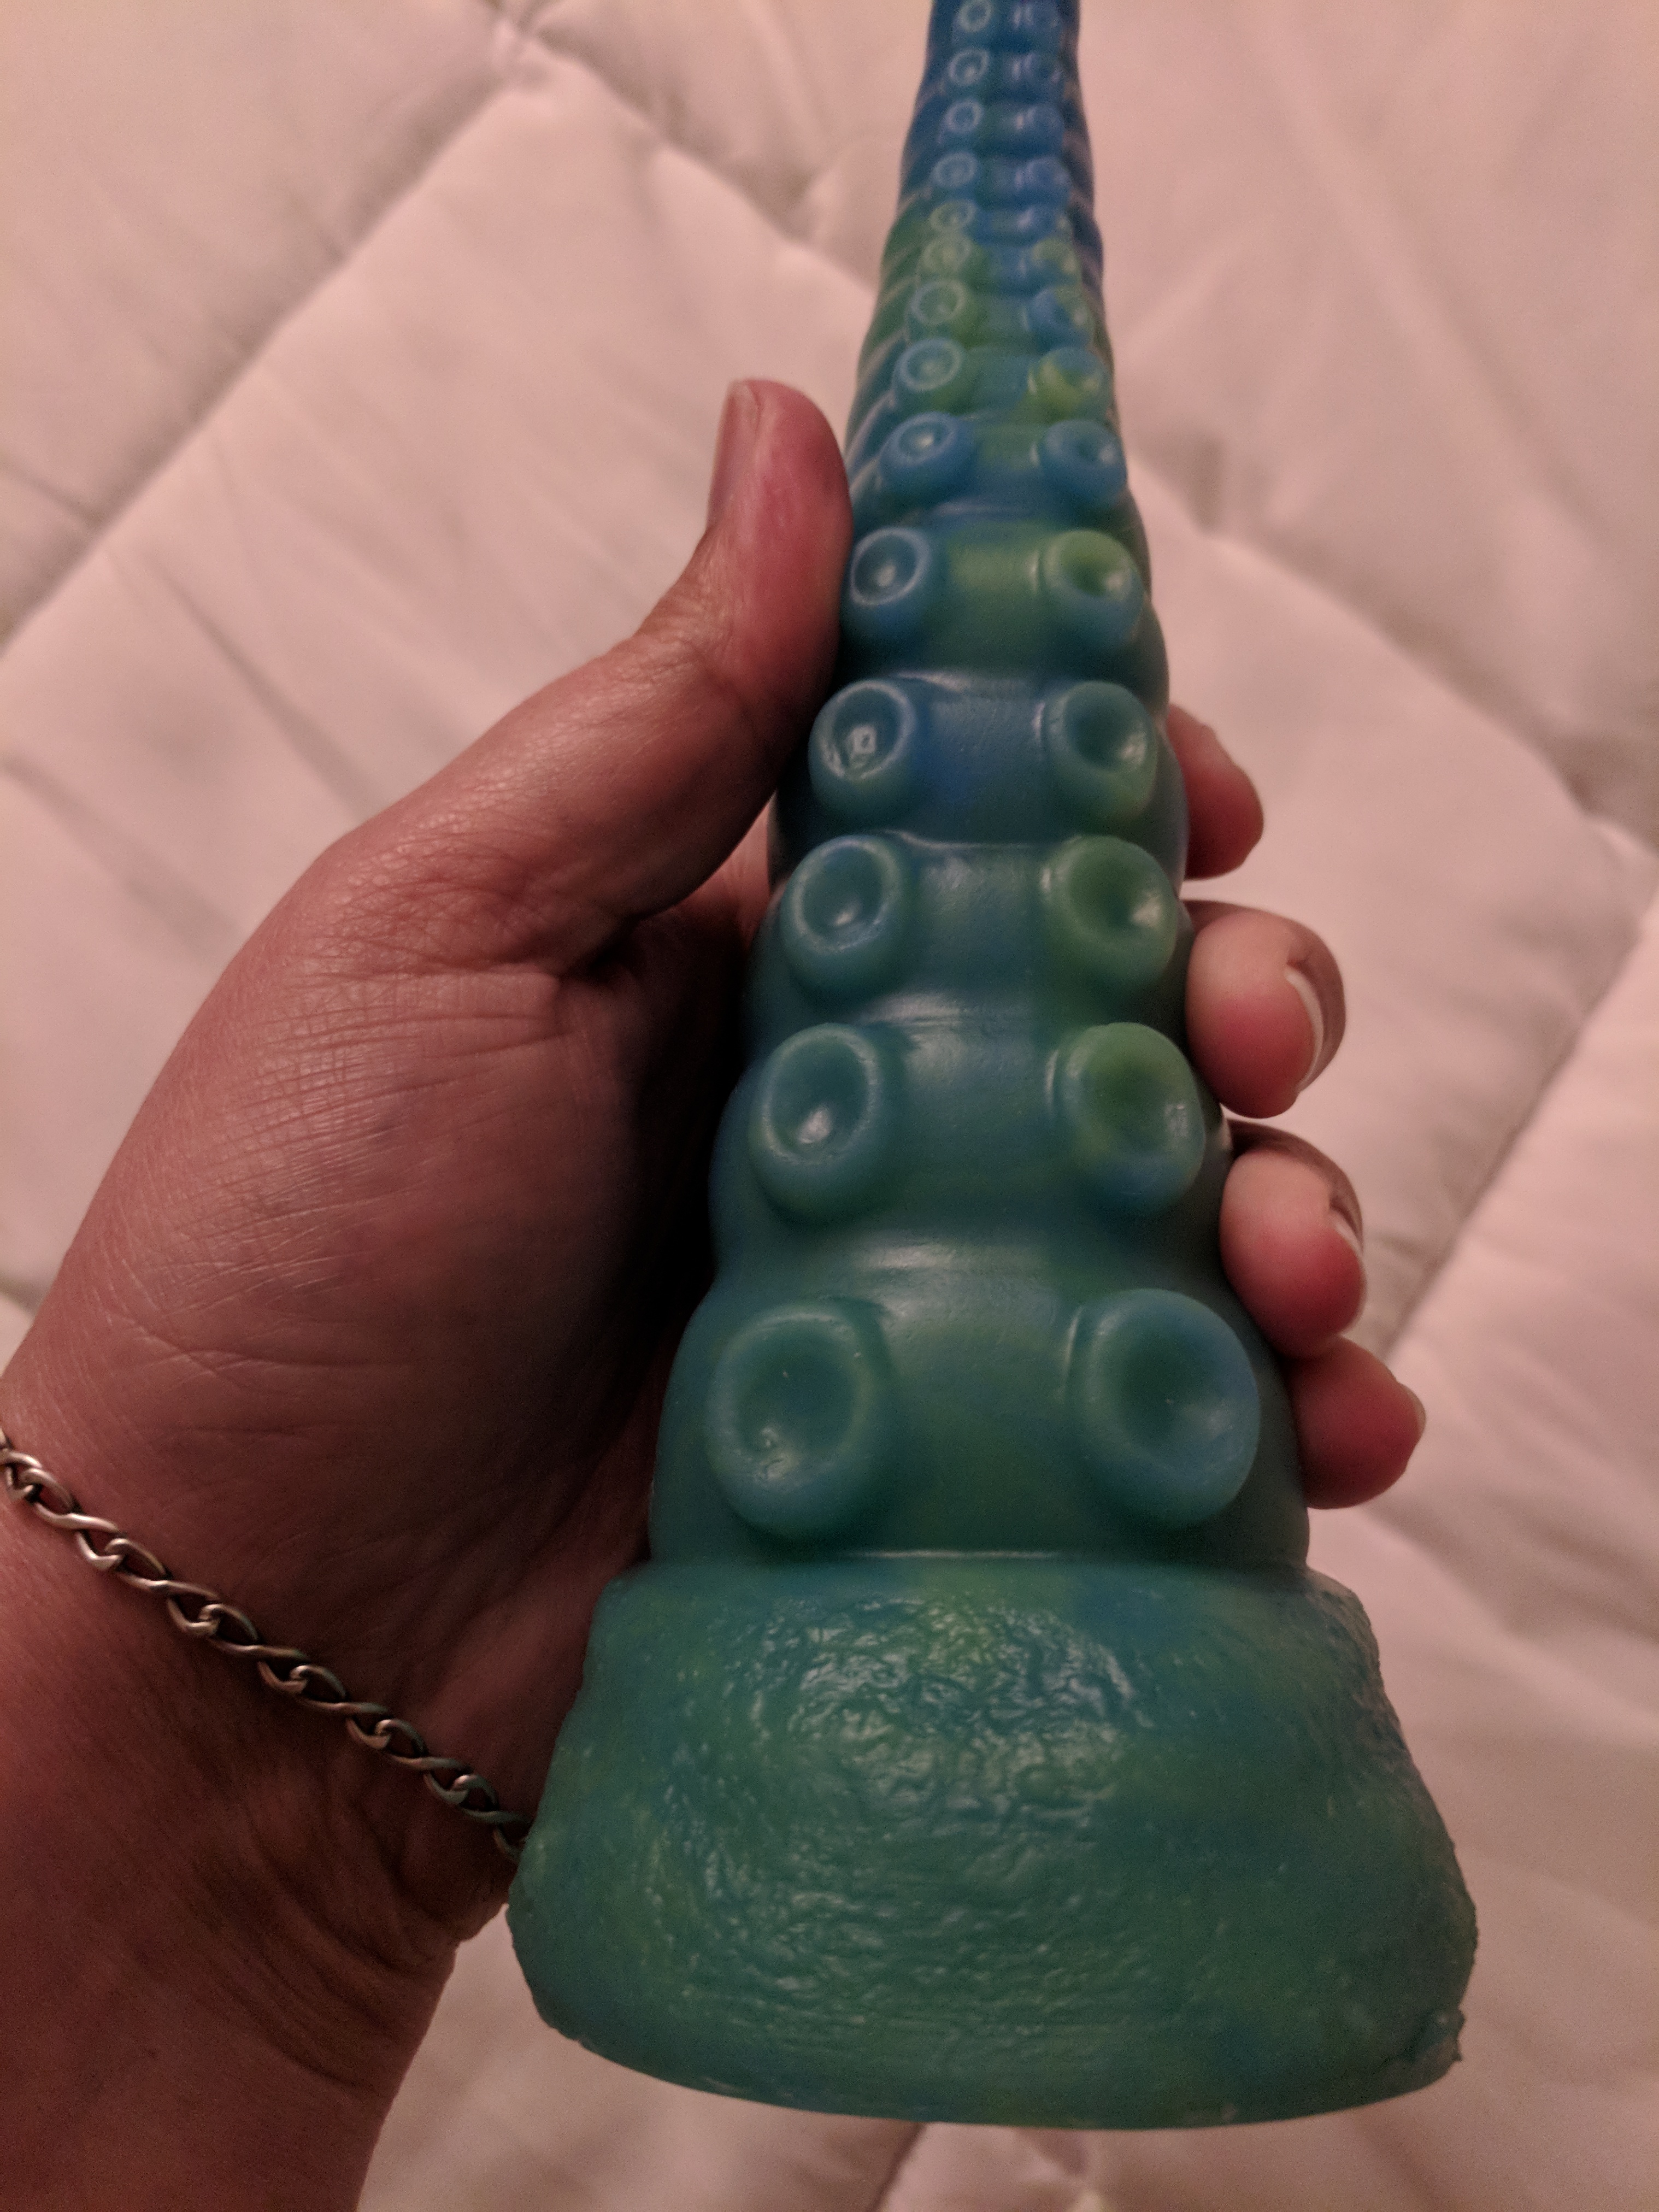 Tentacle dildo bottom third, showing the base and the width of the toy at that base